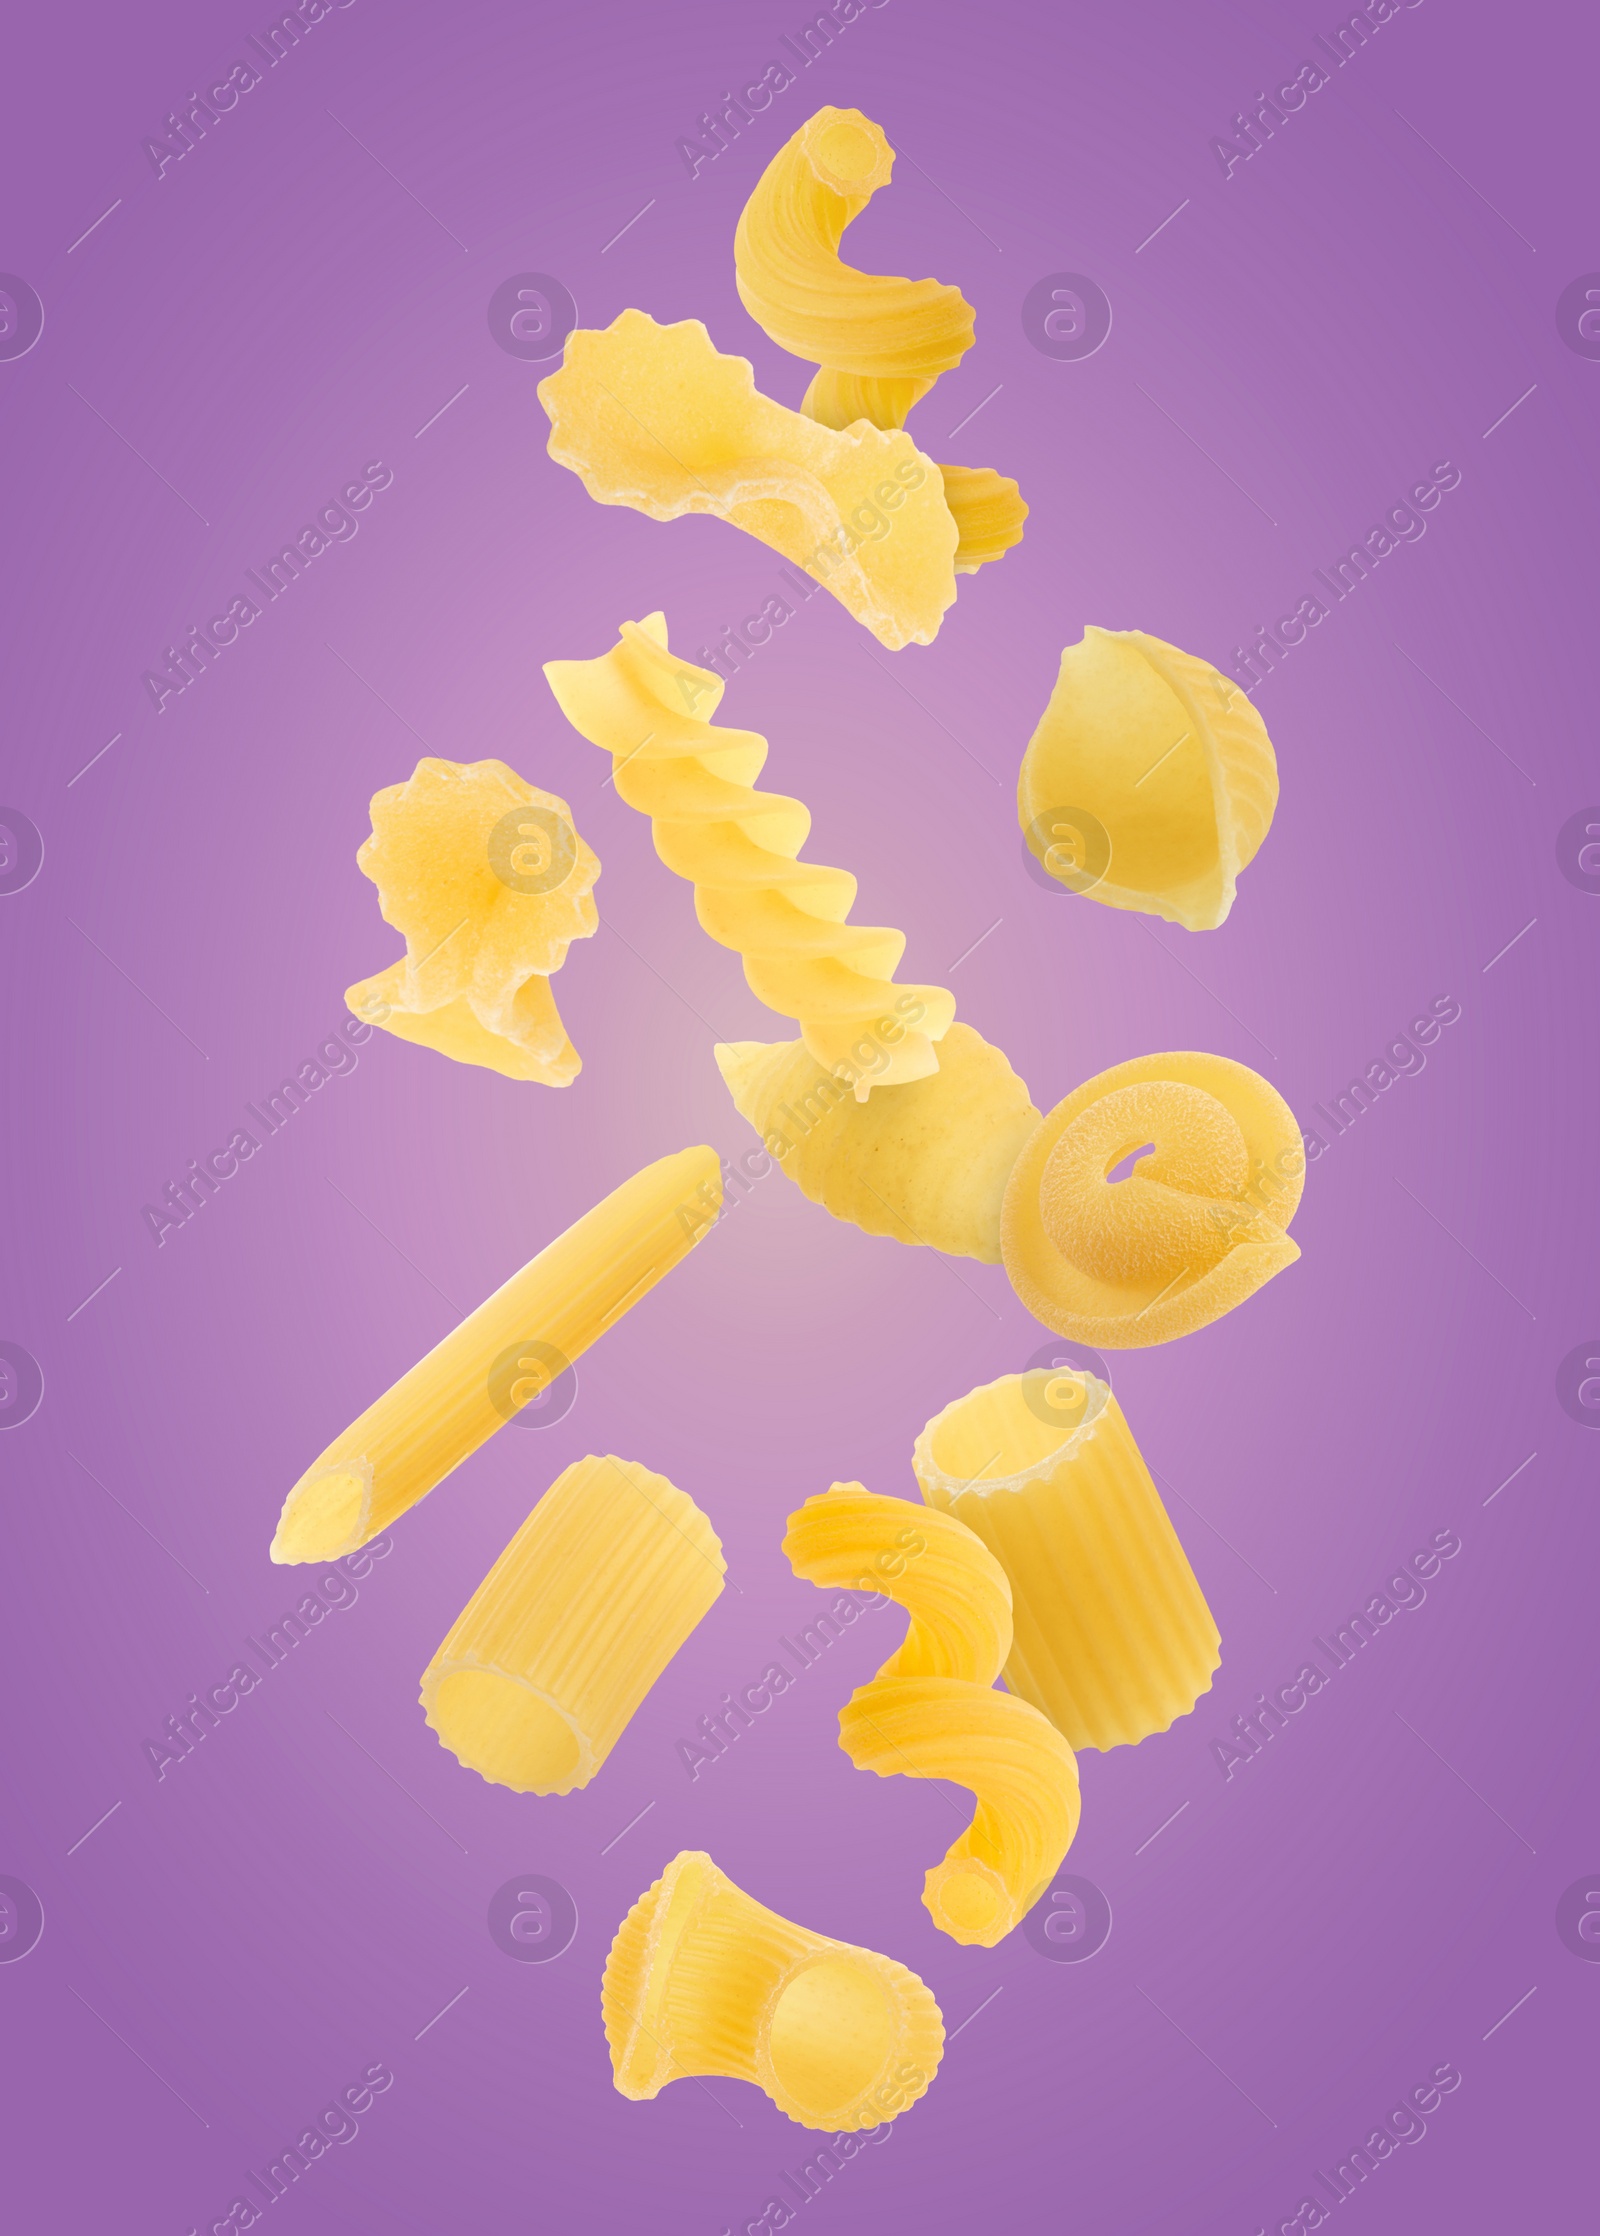 Image of Different types of pasta flying on purple background